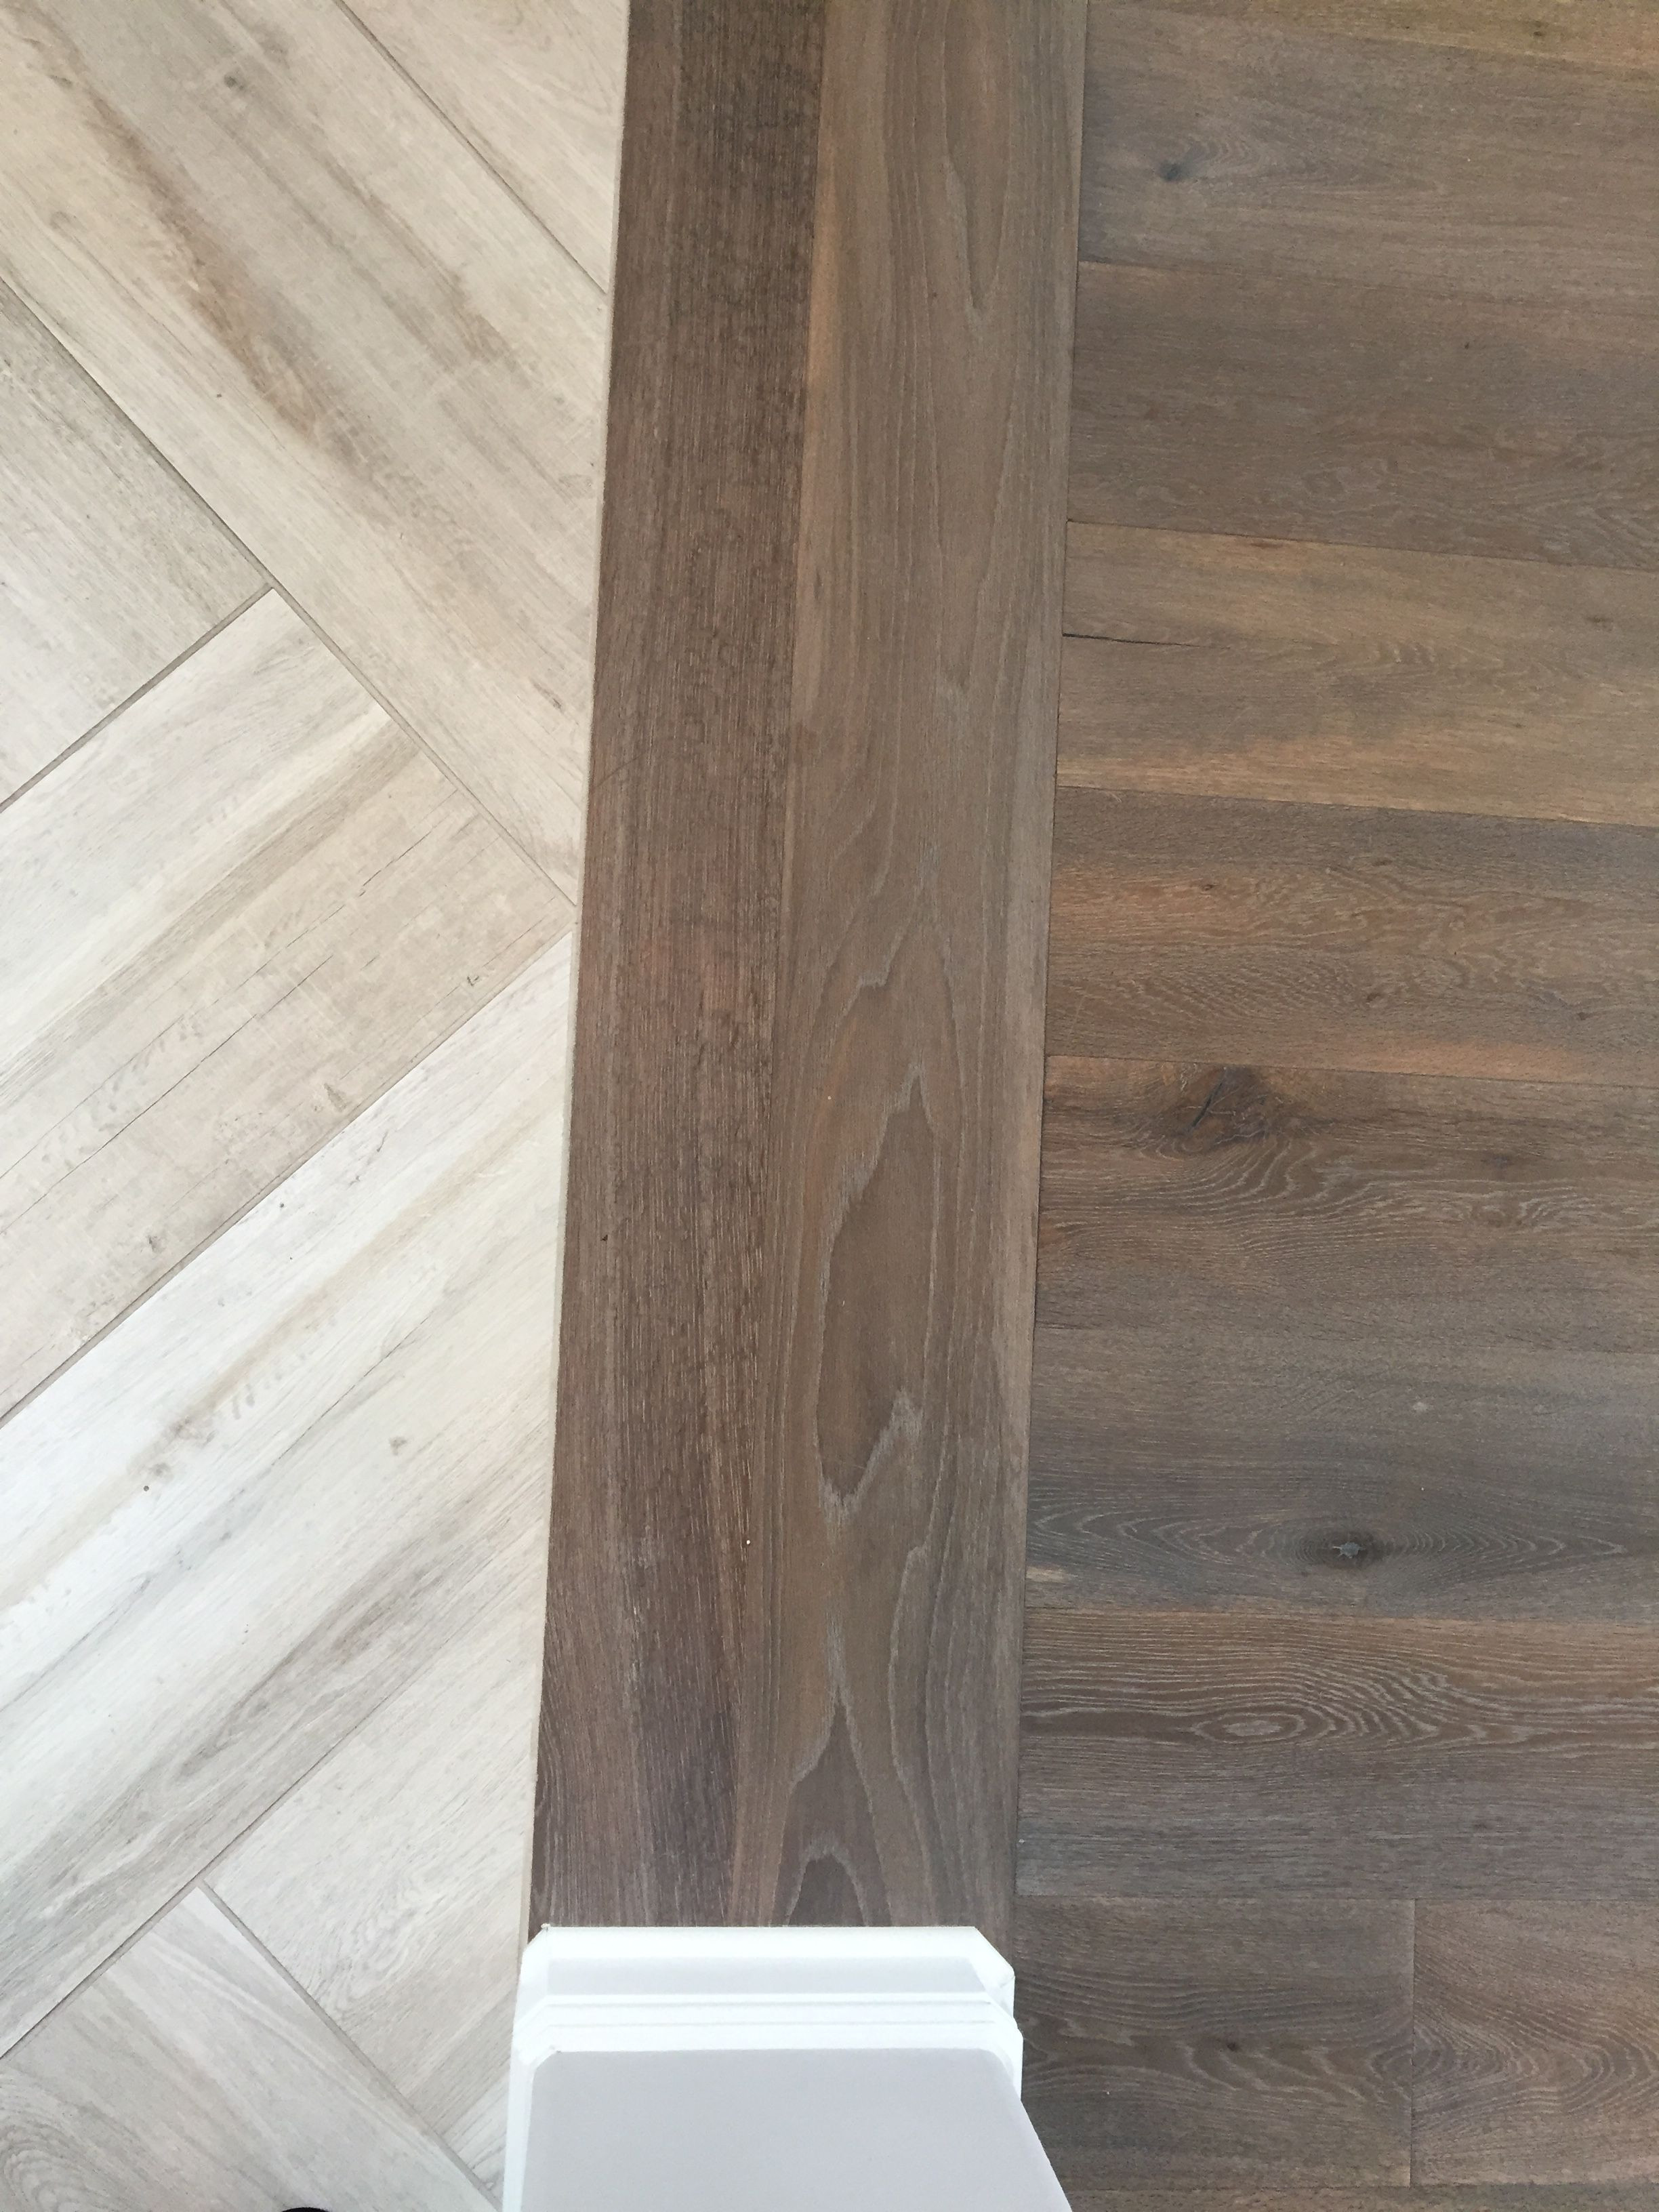 how to stain a hardwood floor by hand of floor transition laminate to herringbone tile pattern model for floor transition laminate to herringbone tile pattern herringbone tile pattern herringbone wood floor